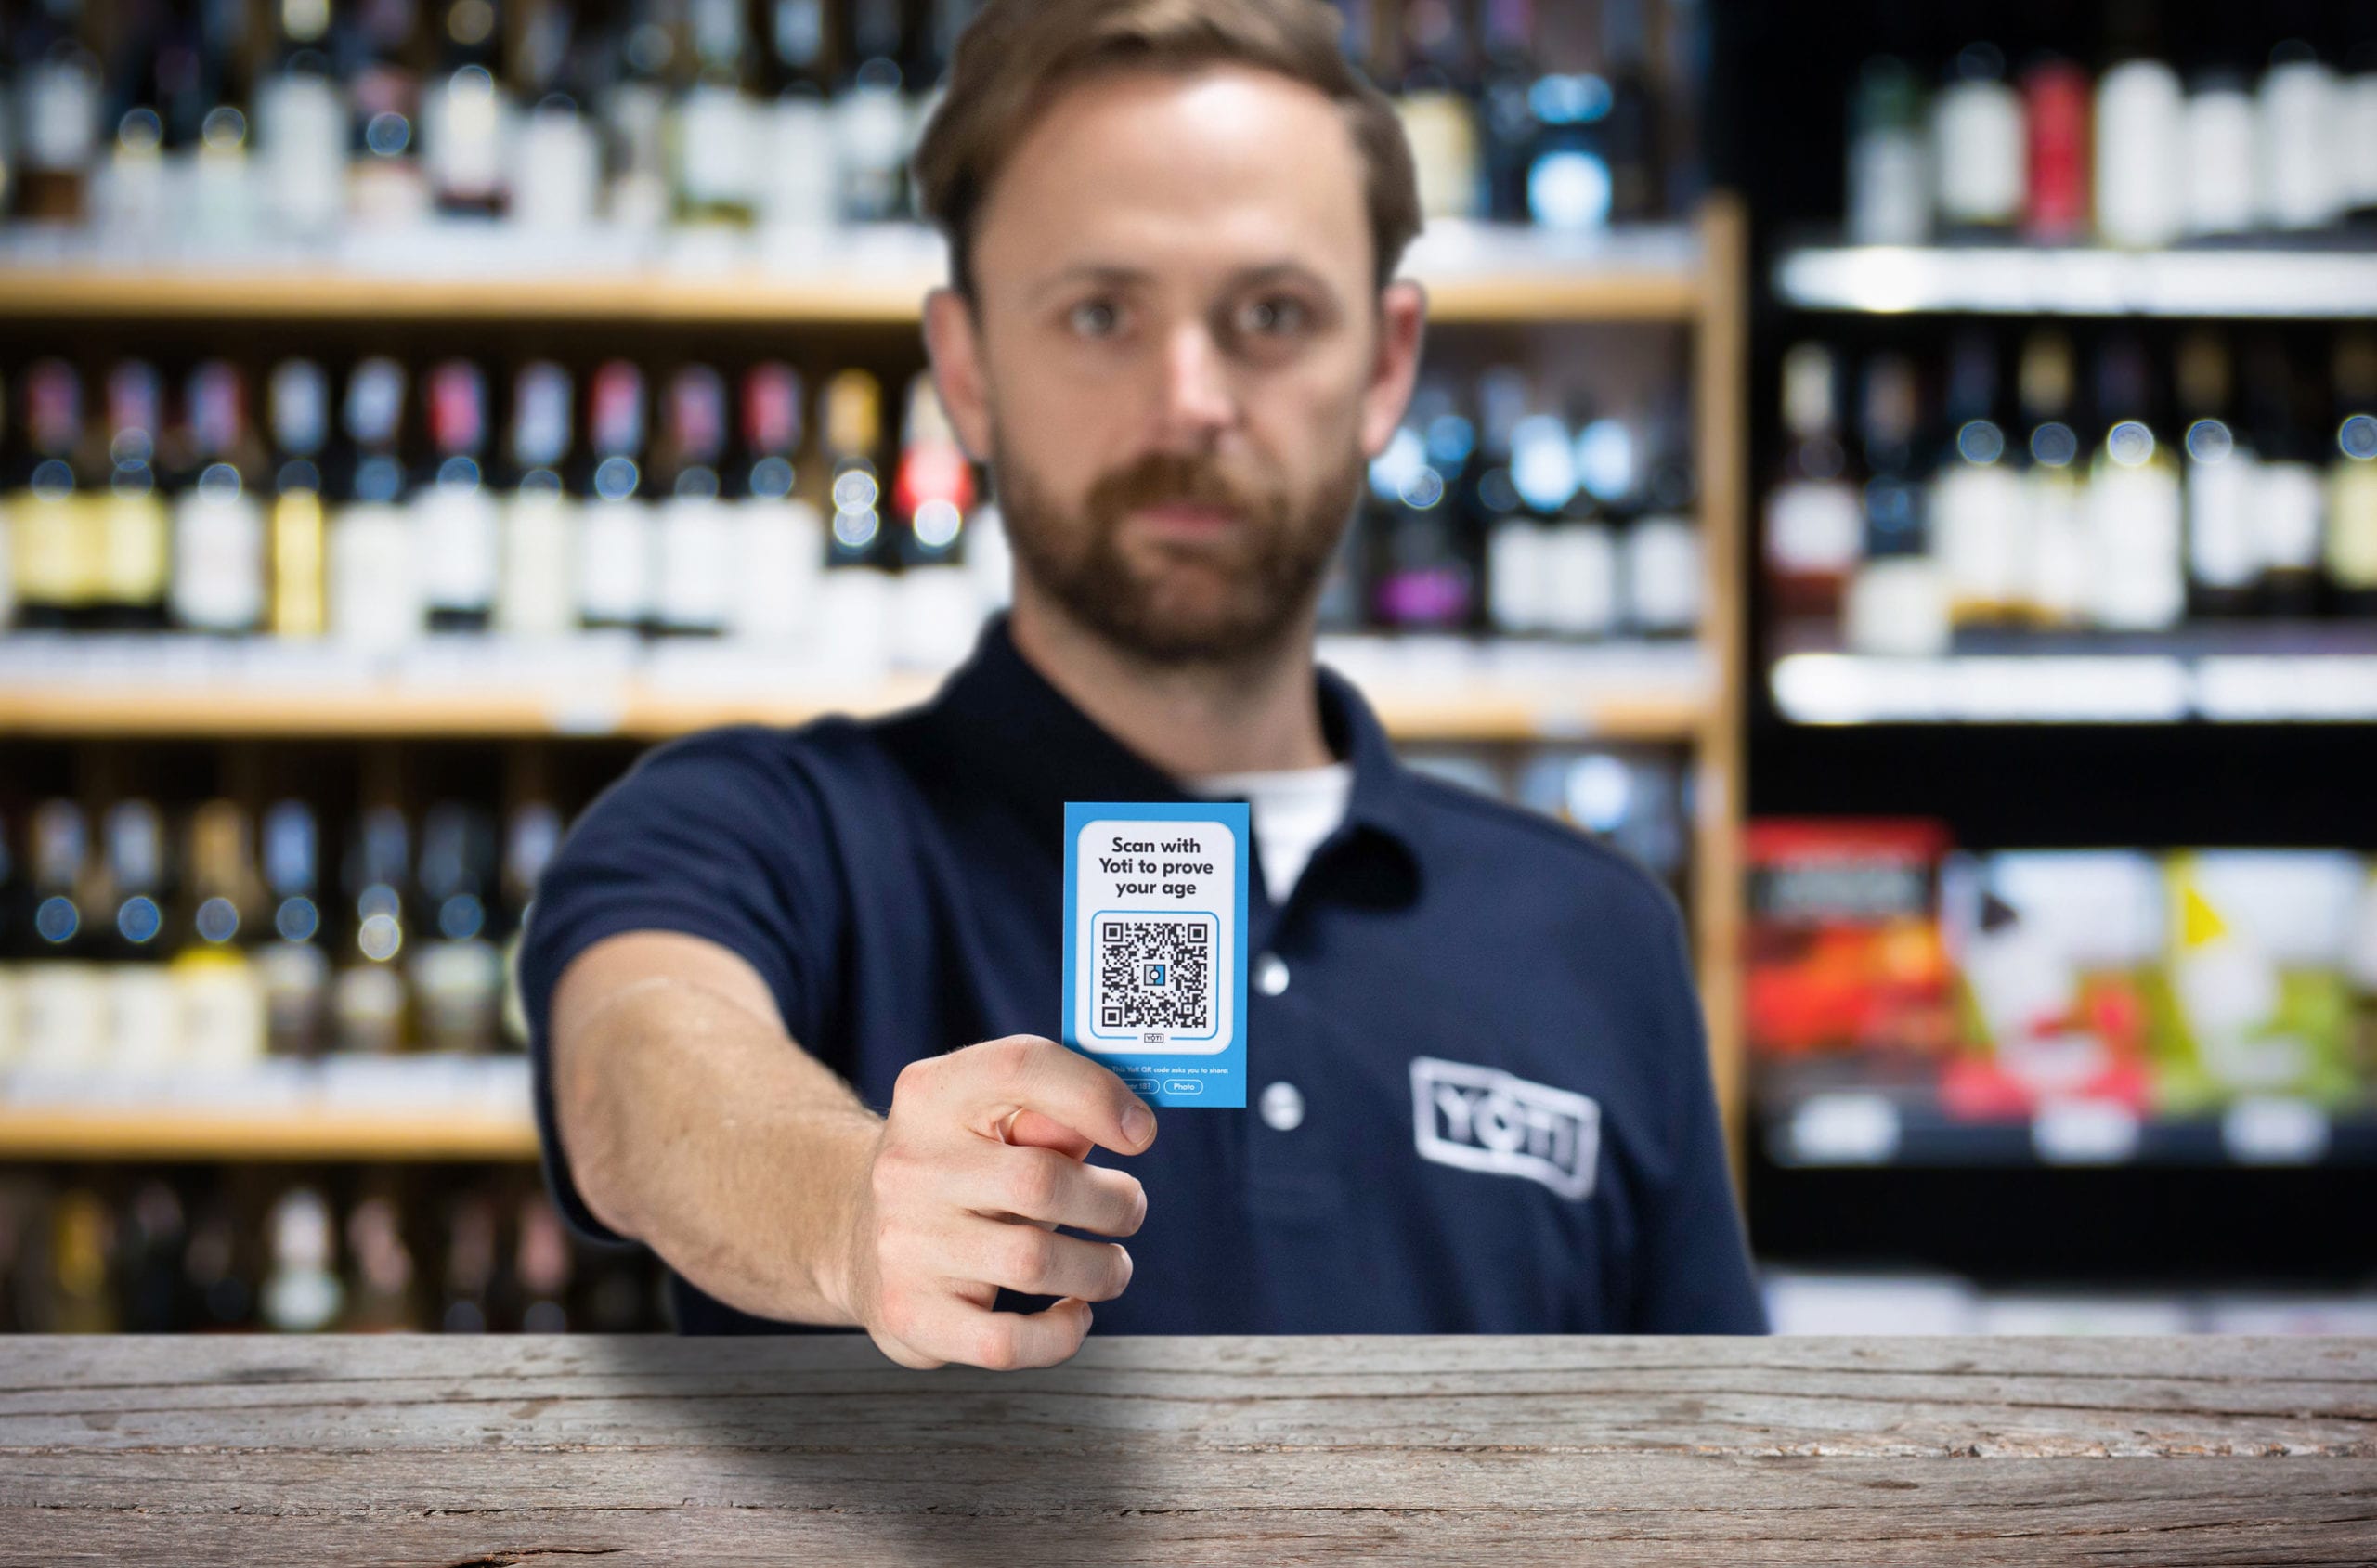 Digital ID in the UK: convenience stores, Post Offices and more